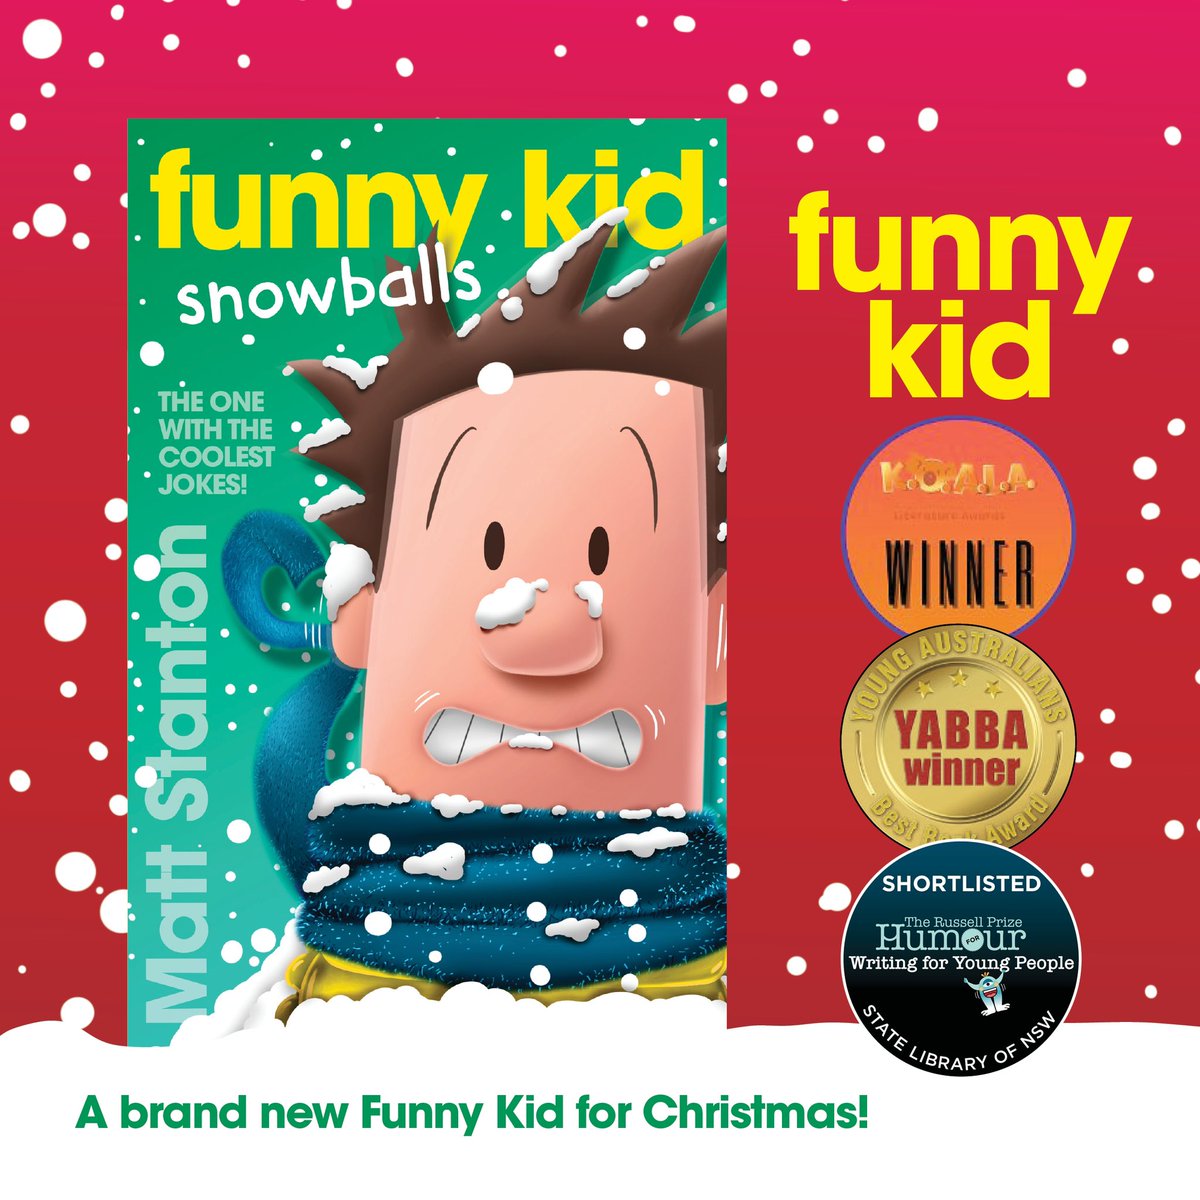 New Funny Kid book out tomorrow! Some great awards for the series this year.